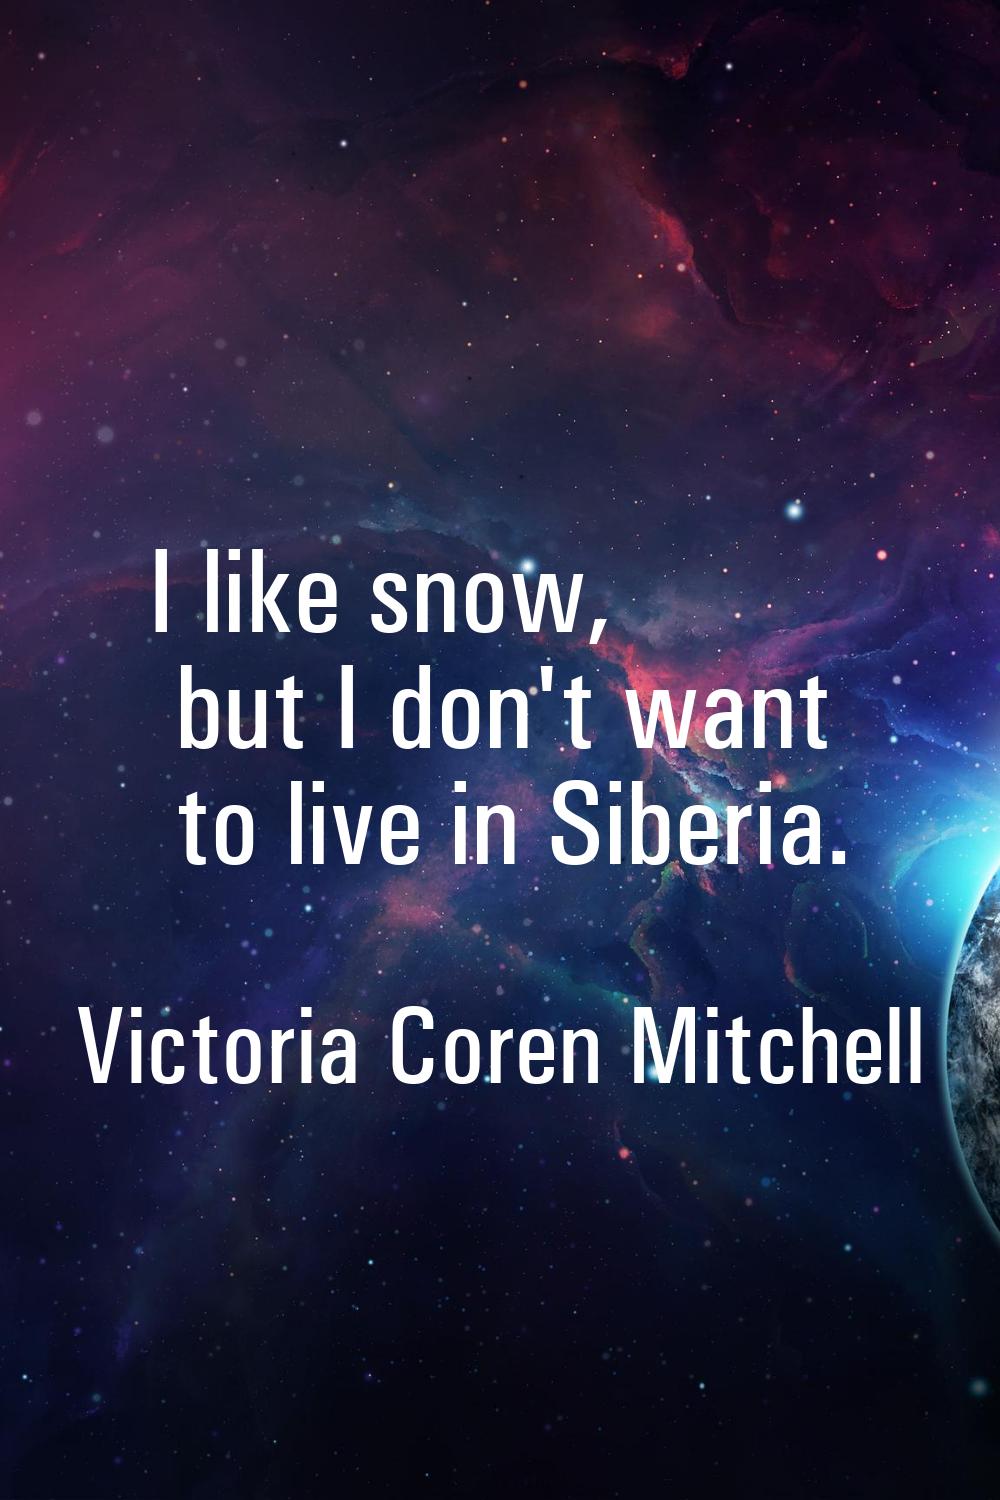 I like snow, but I don't want to live in Siberia.